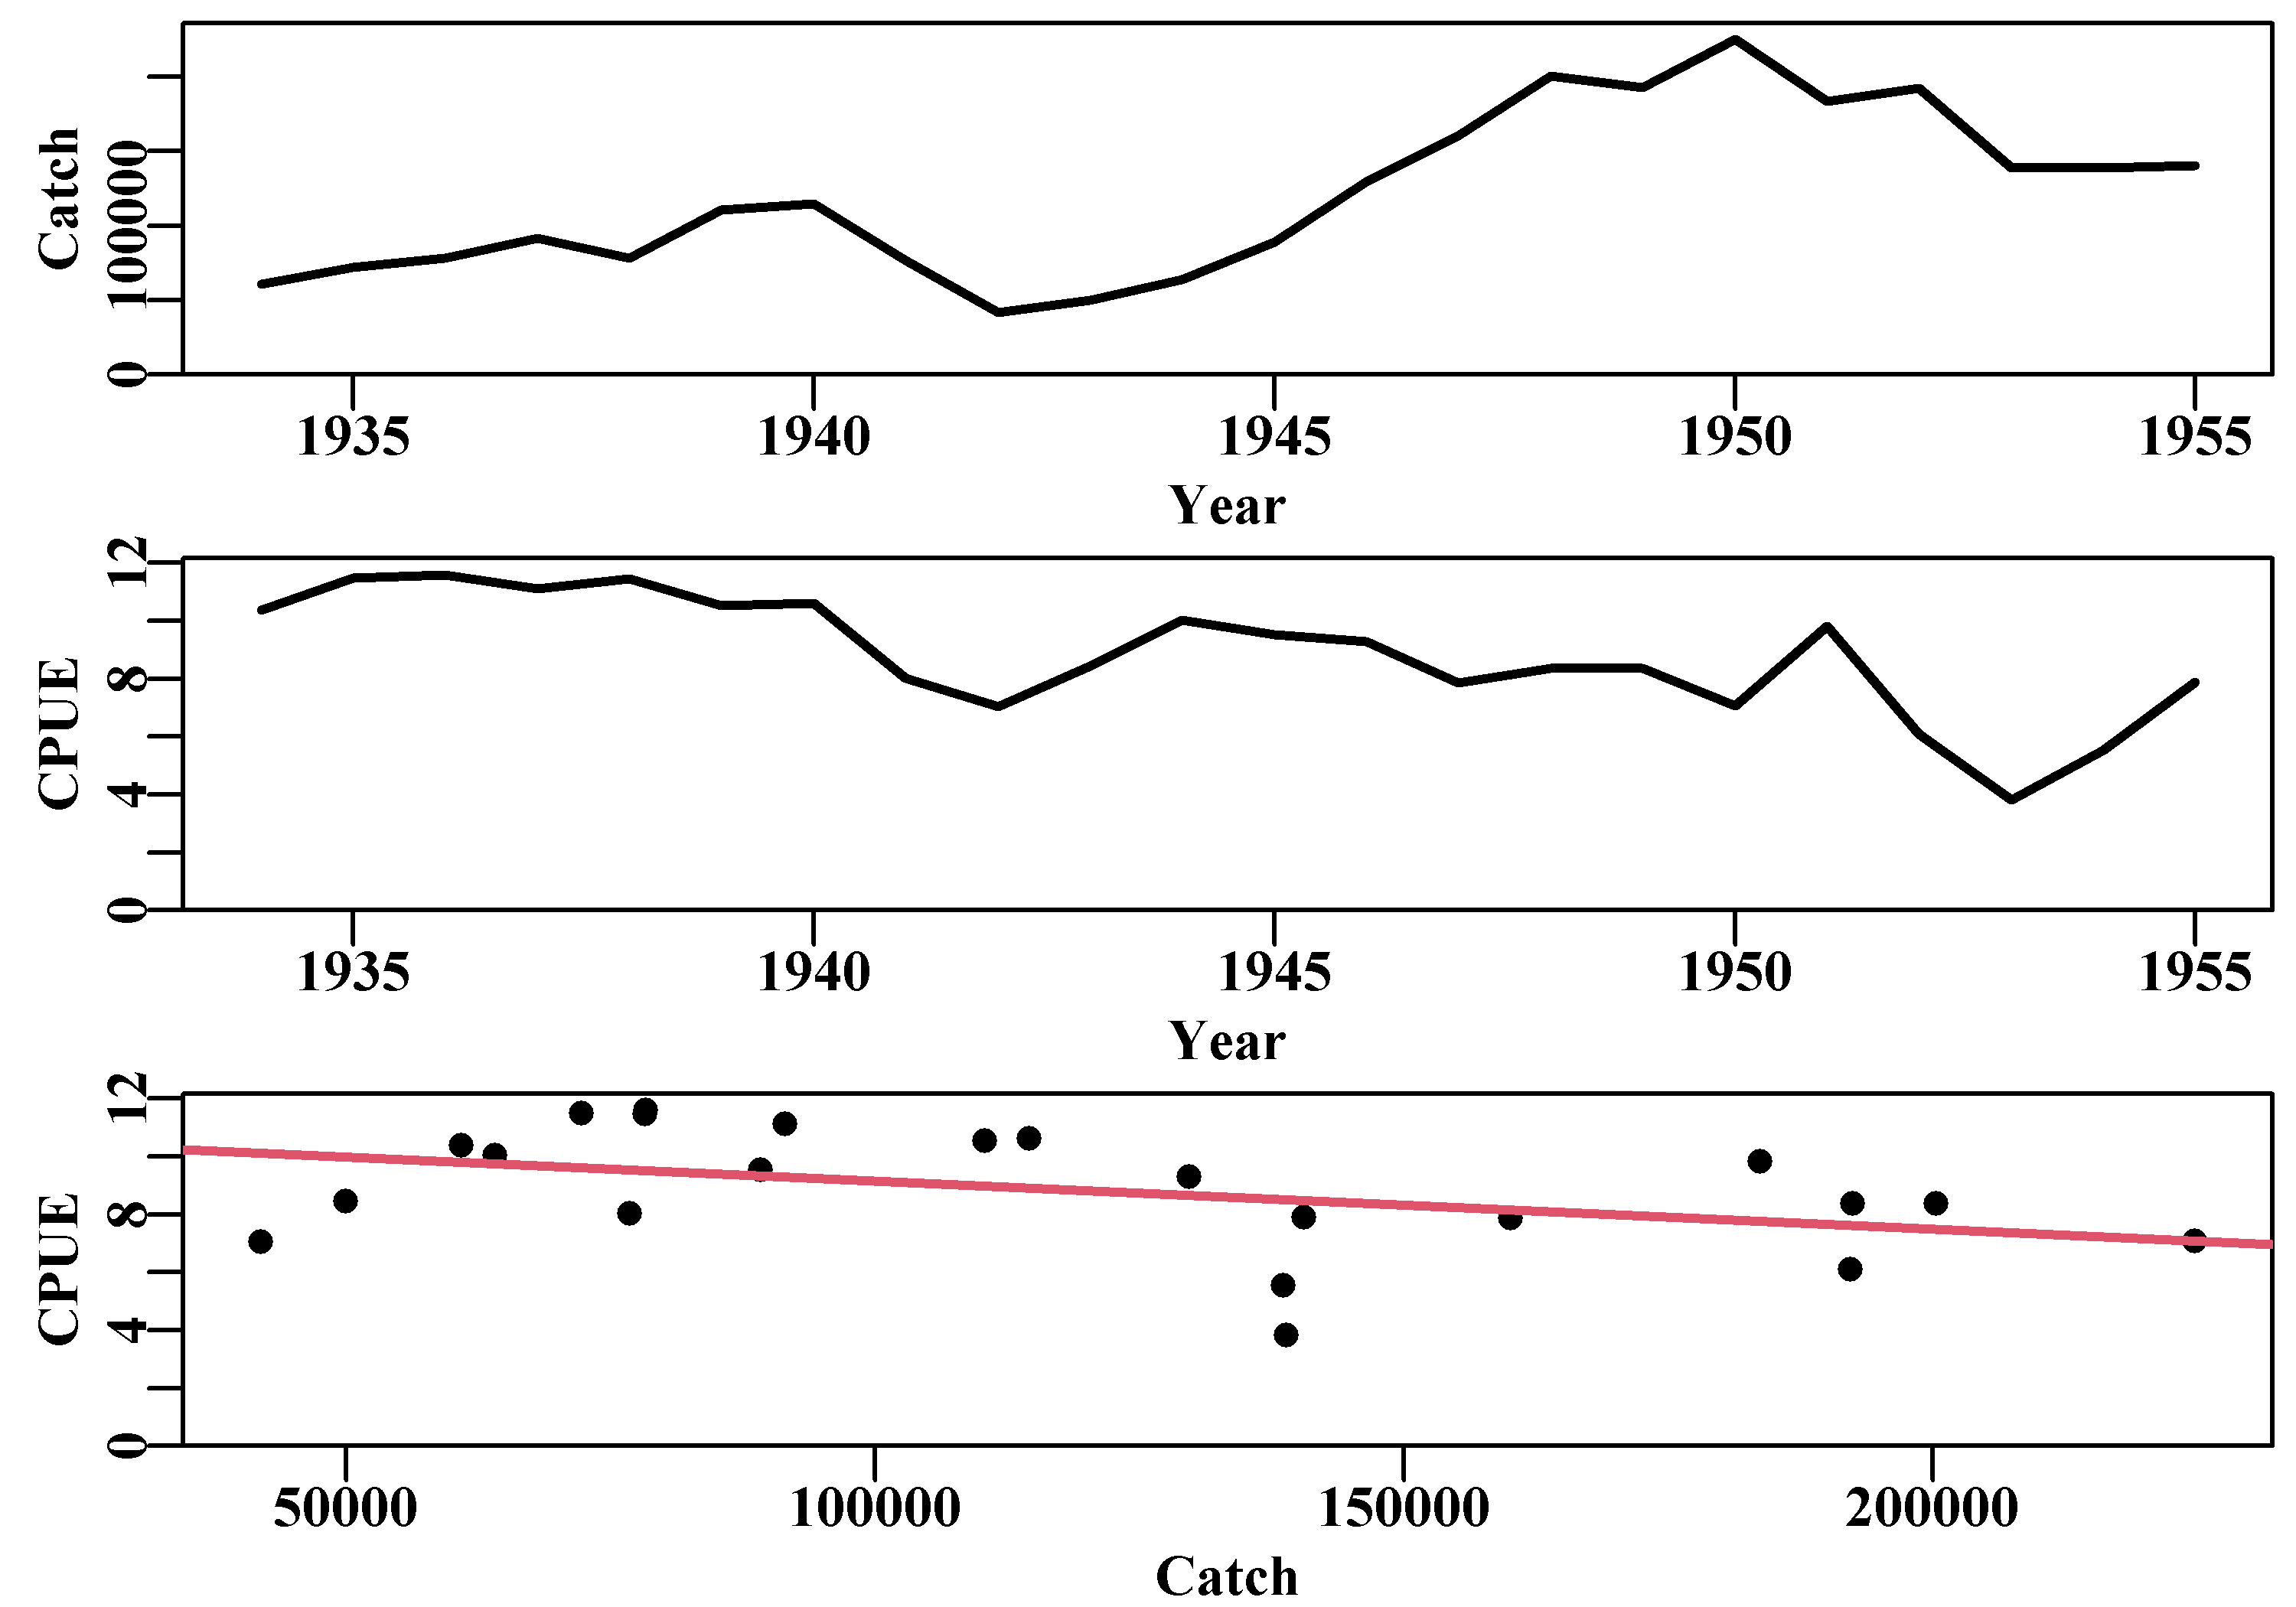 The catches and cpue by year, and their relationship, described by a regression, for the Schaefer (1957) yellowfin tuna fishery data.